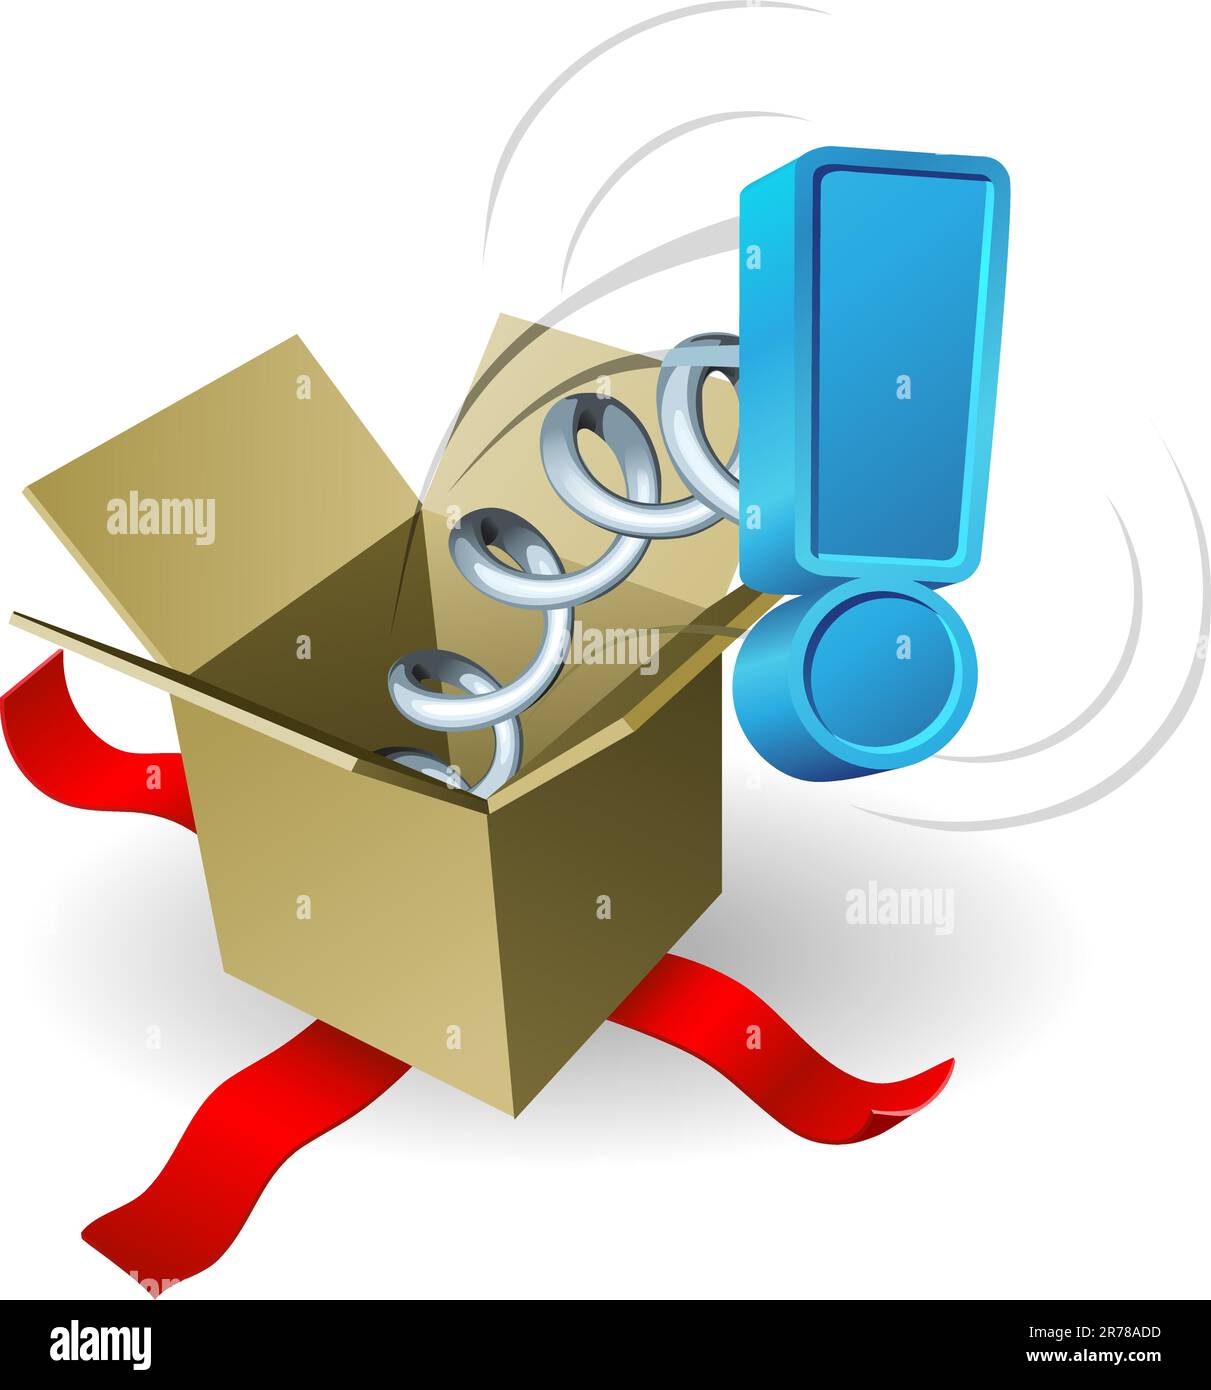 An exclamation mark springing out of a box conceptual illustration. Stock Vector